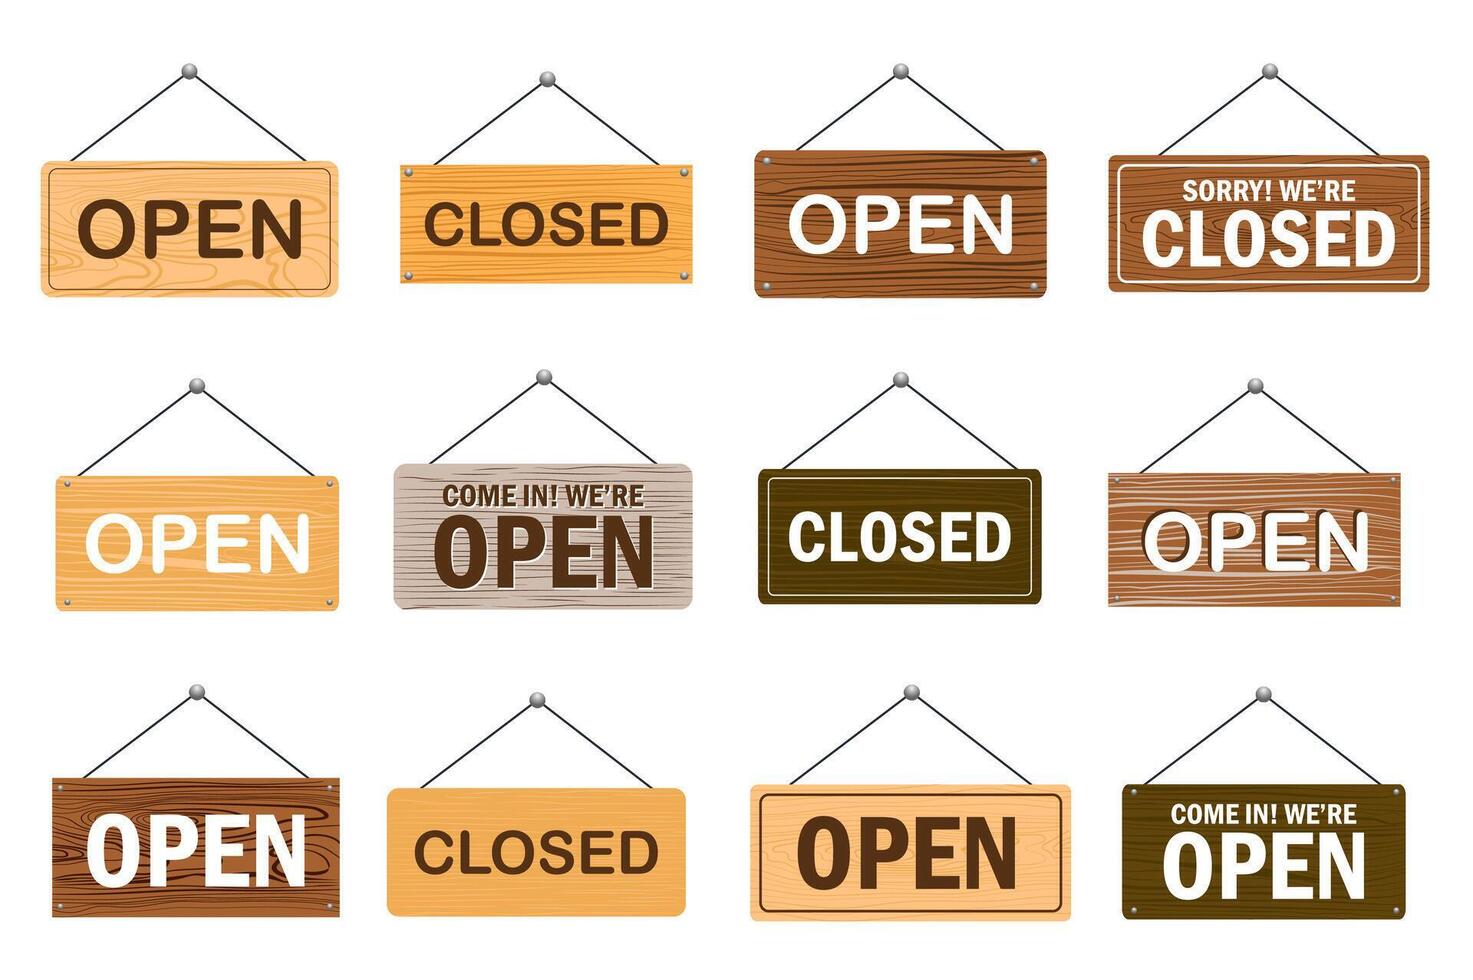 Open and closed signboards mega set elements in flat design. Bundle of wooden board plates with text message to clients for hanging at shops entrances. Vector illustration isolated graphic objects